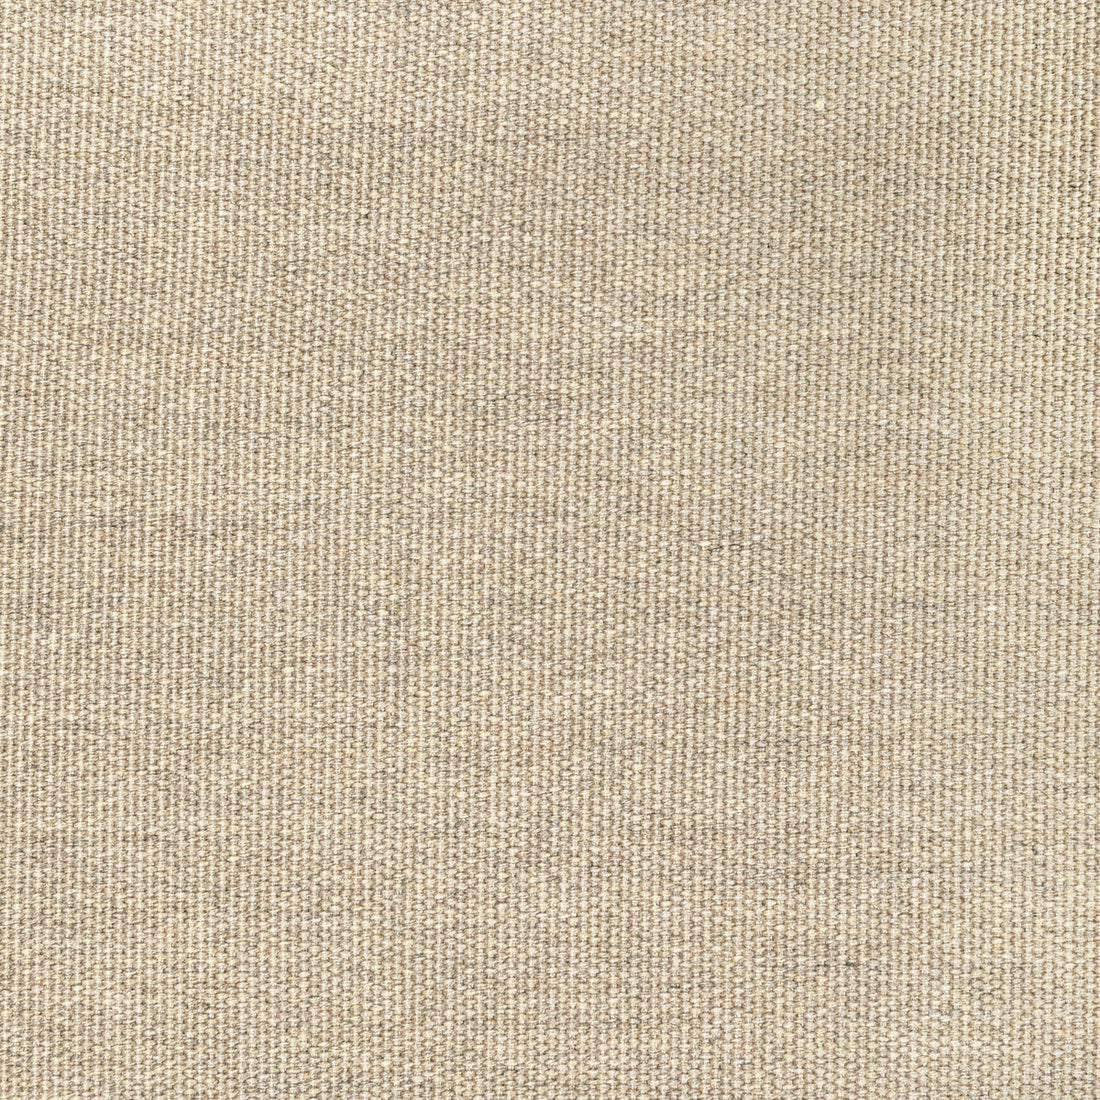 Kravet Basics fabric in 36827-16 color - pattern 36827.16.0 - by Kravet Basics in the Indoor / Outdoor collection